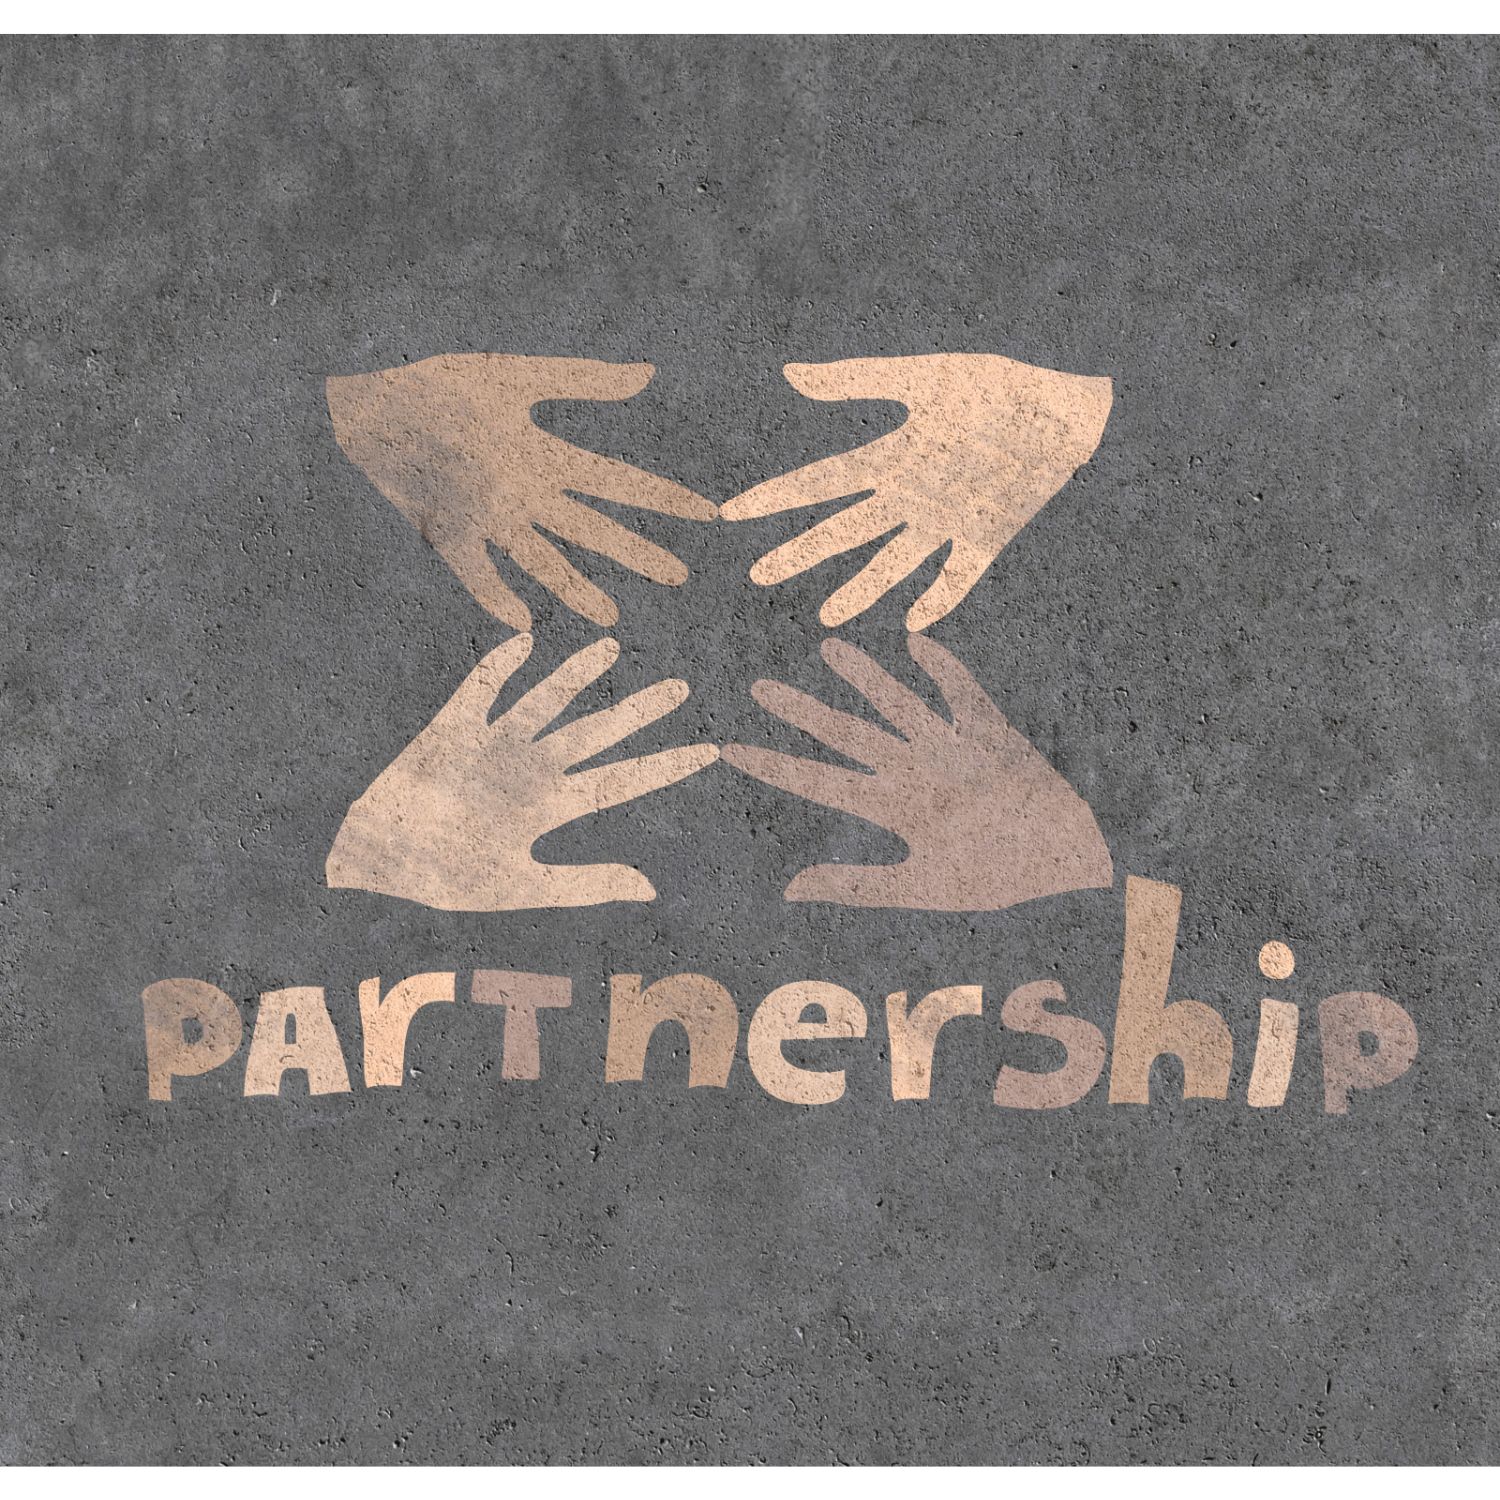 the word partnership with 4 hands